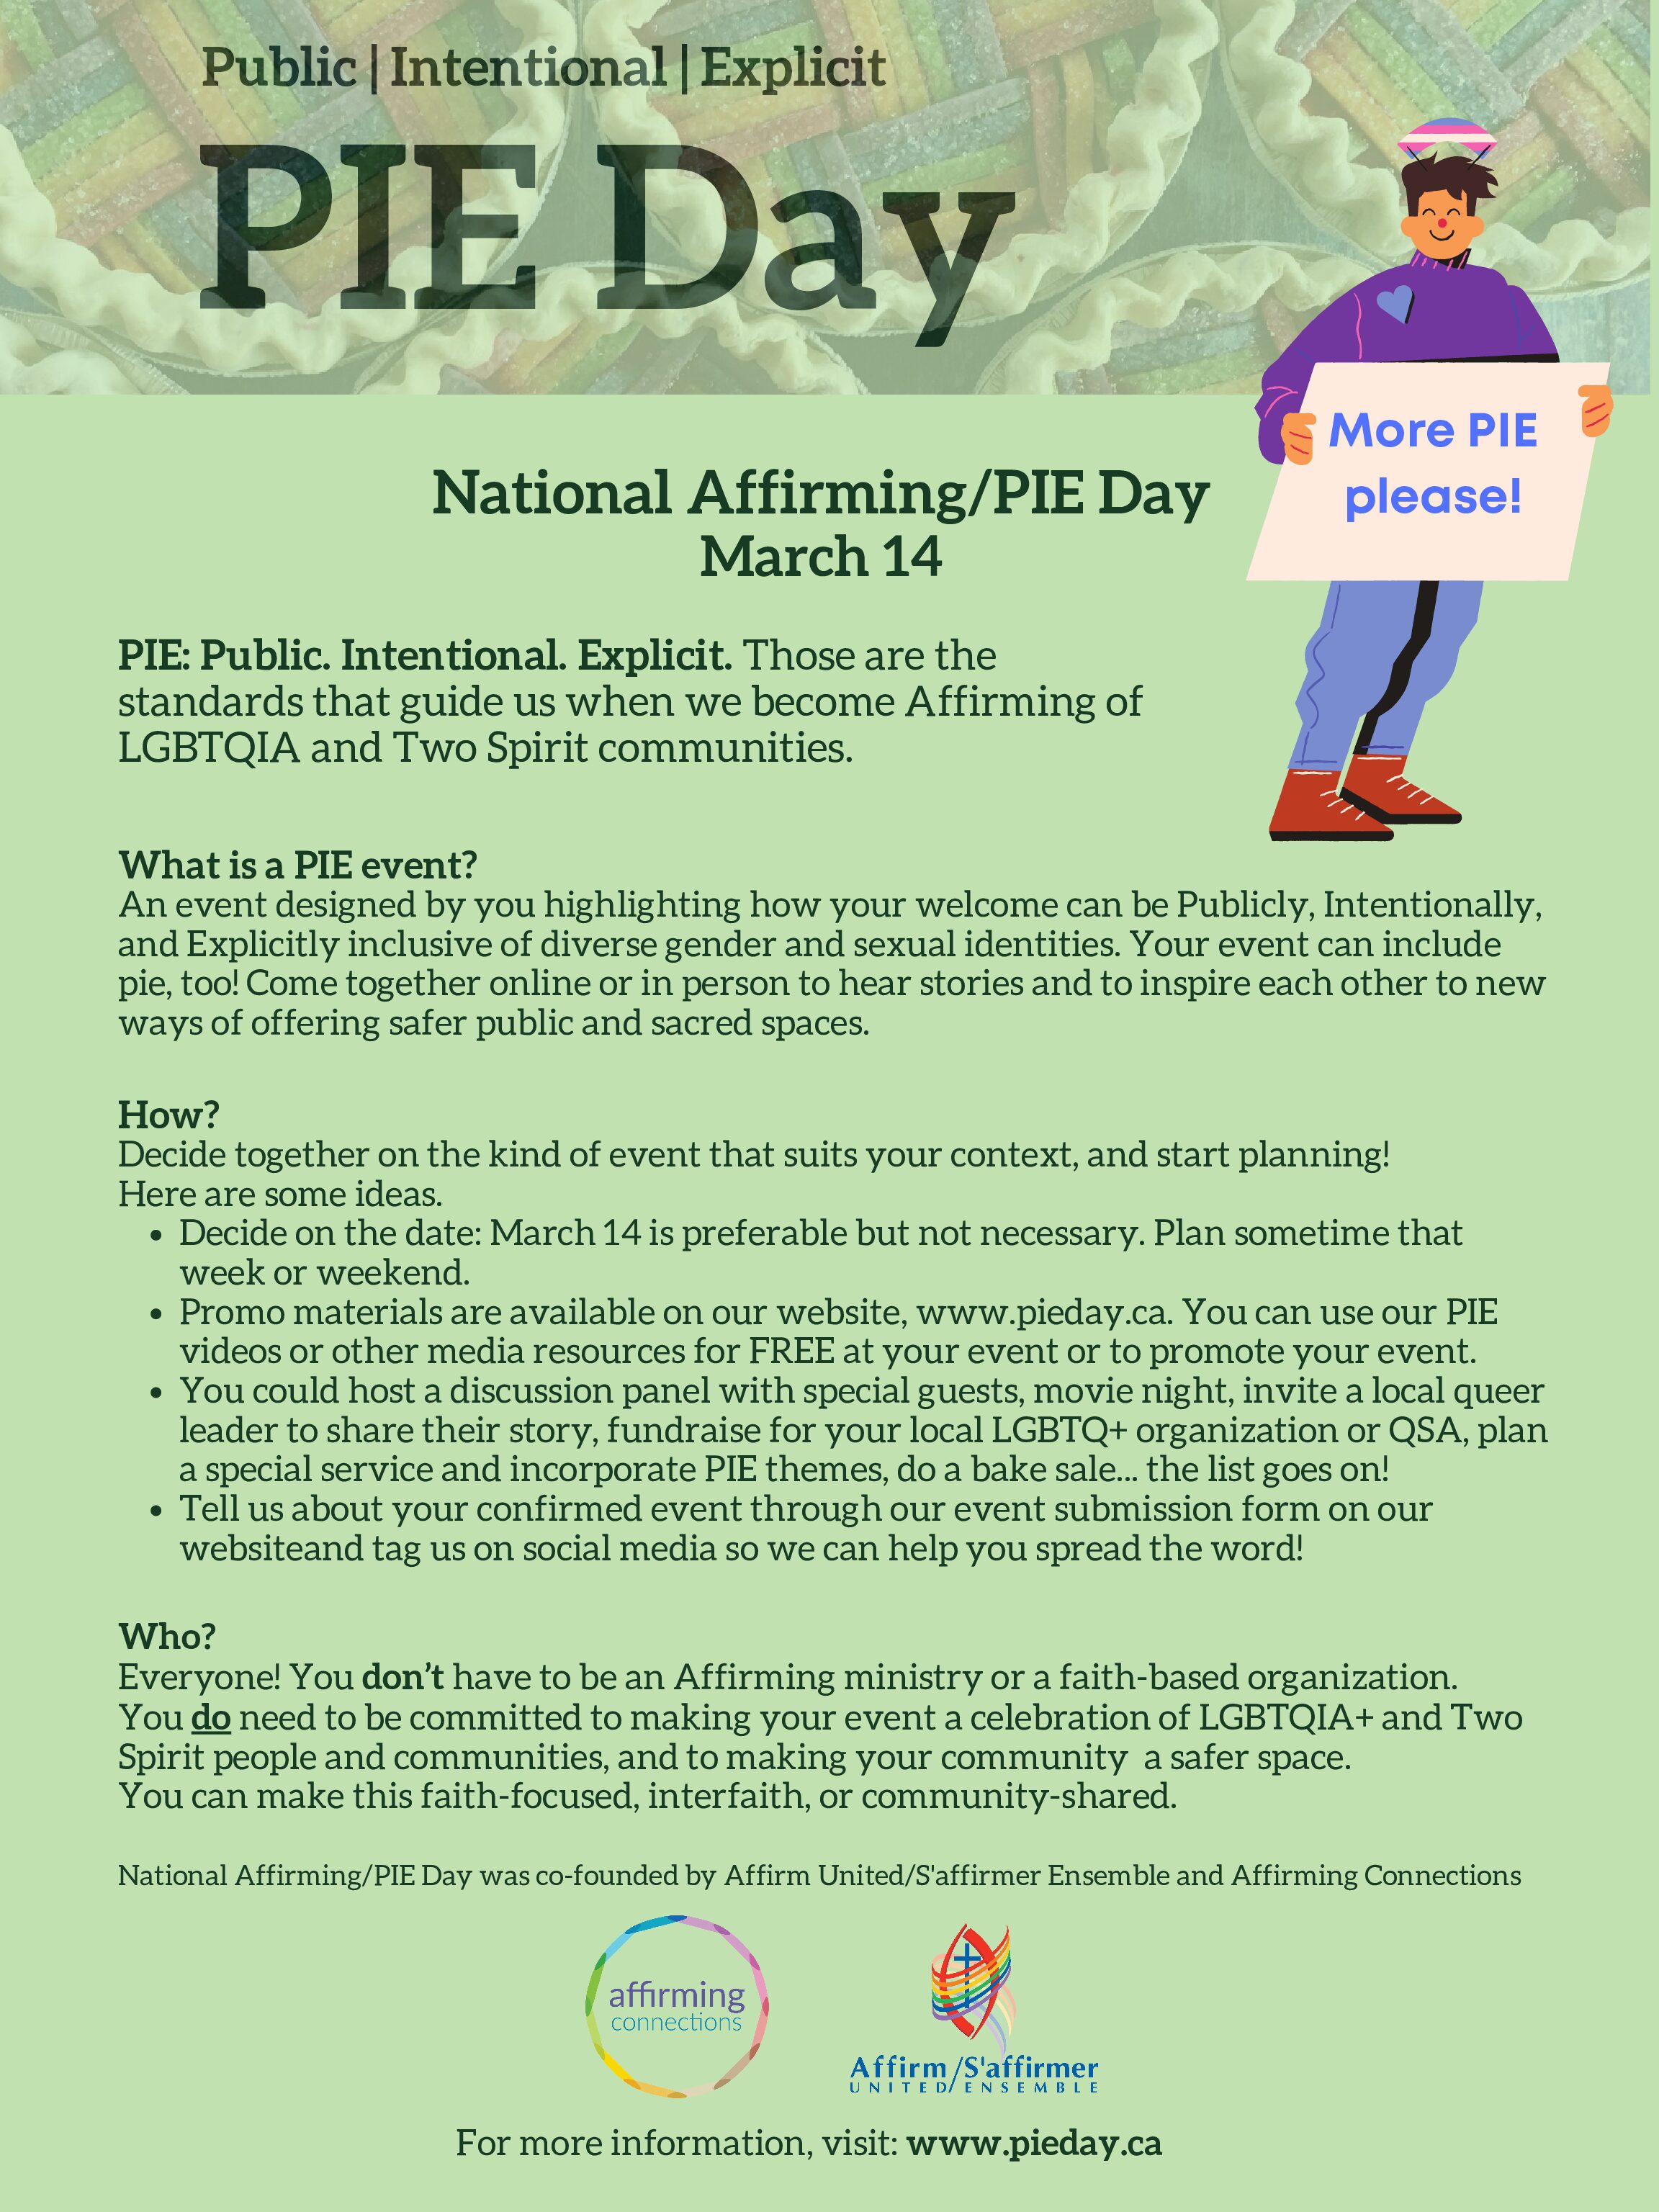 National Affirming/PIE Day